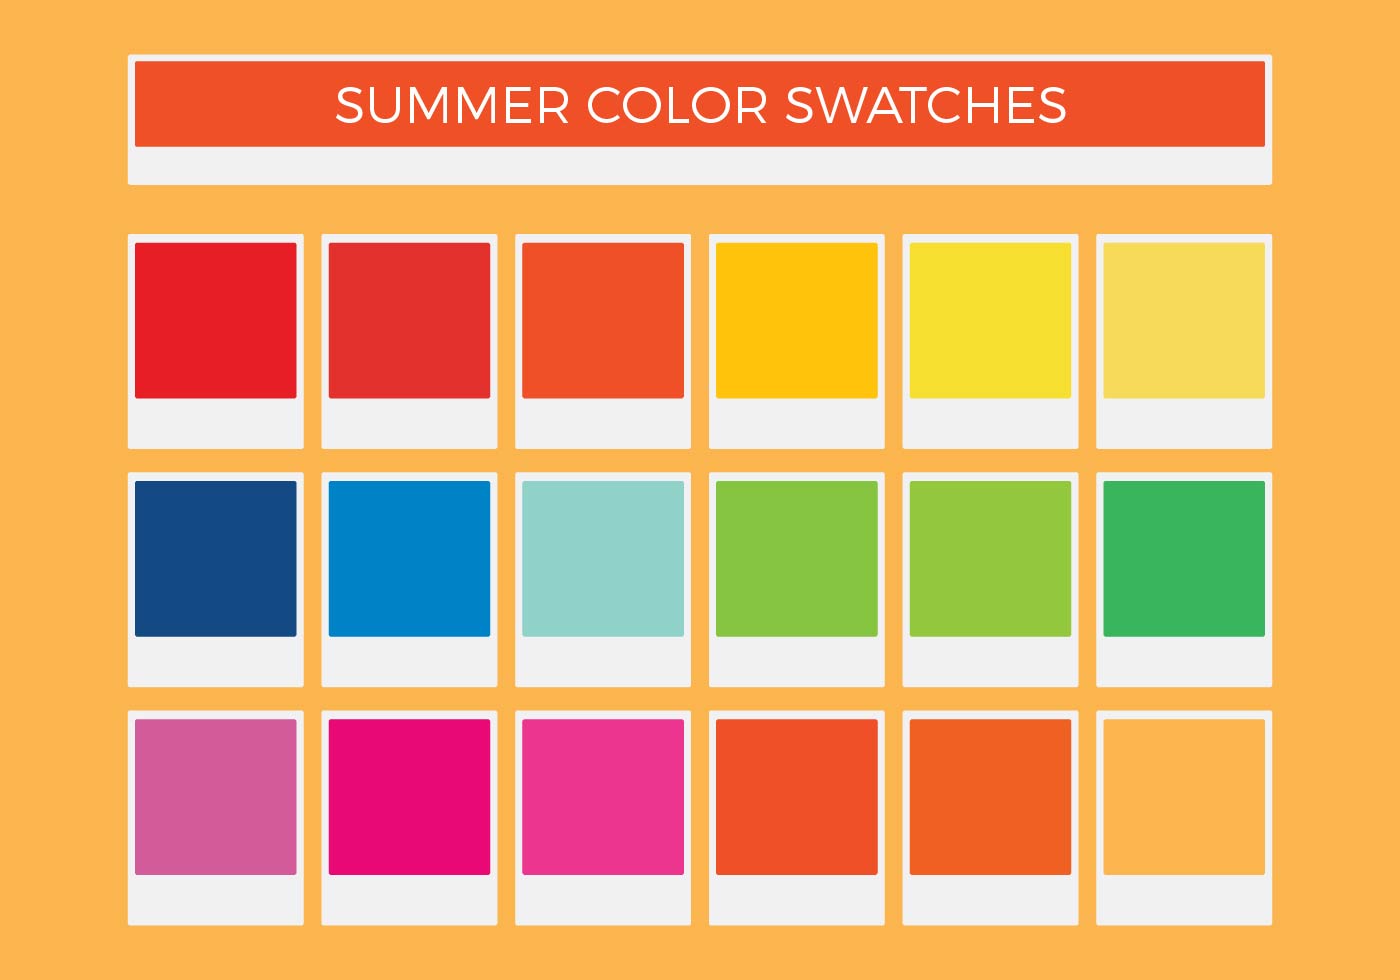 Free Summer Vector Color Swatches Download Free Vector Effy Moom Free Coloring Picture wallpaper give a chance to color on the wall without getting in trouble! Fill the walls of your home or office with stress-relieving [effymoom.blogspot.com]